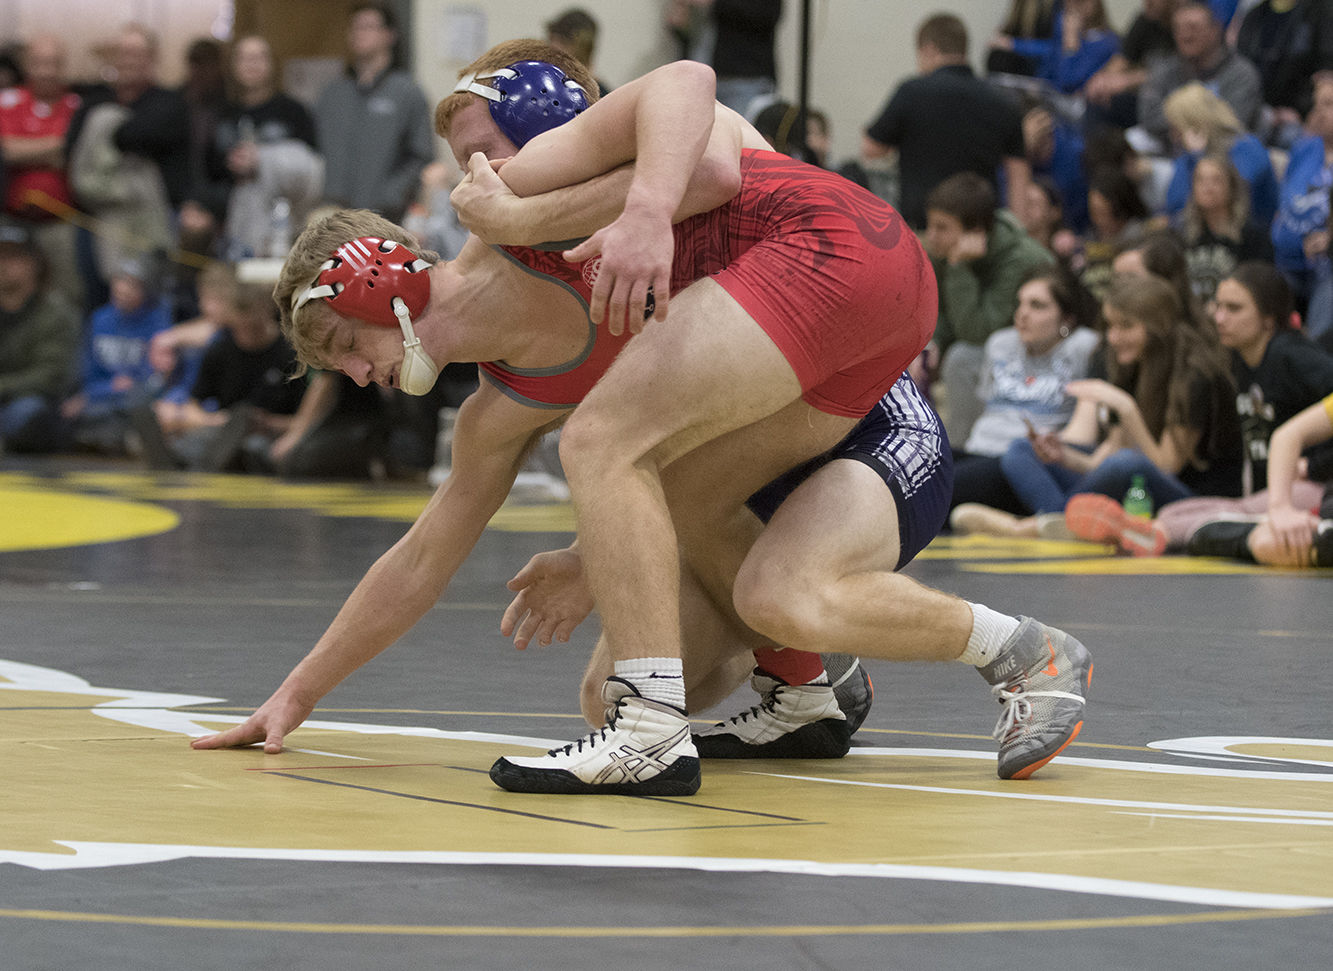 2019 Pierce looks to be a team to watch in wrestling Sports norfolkdailynews pic